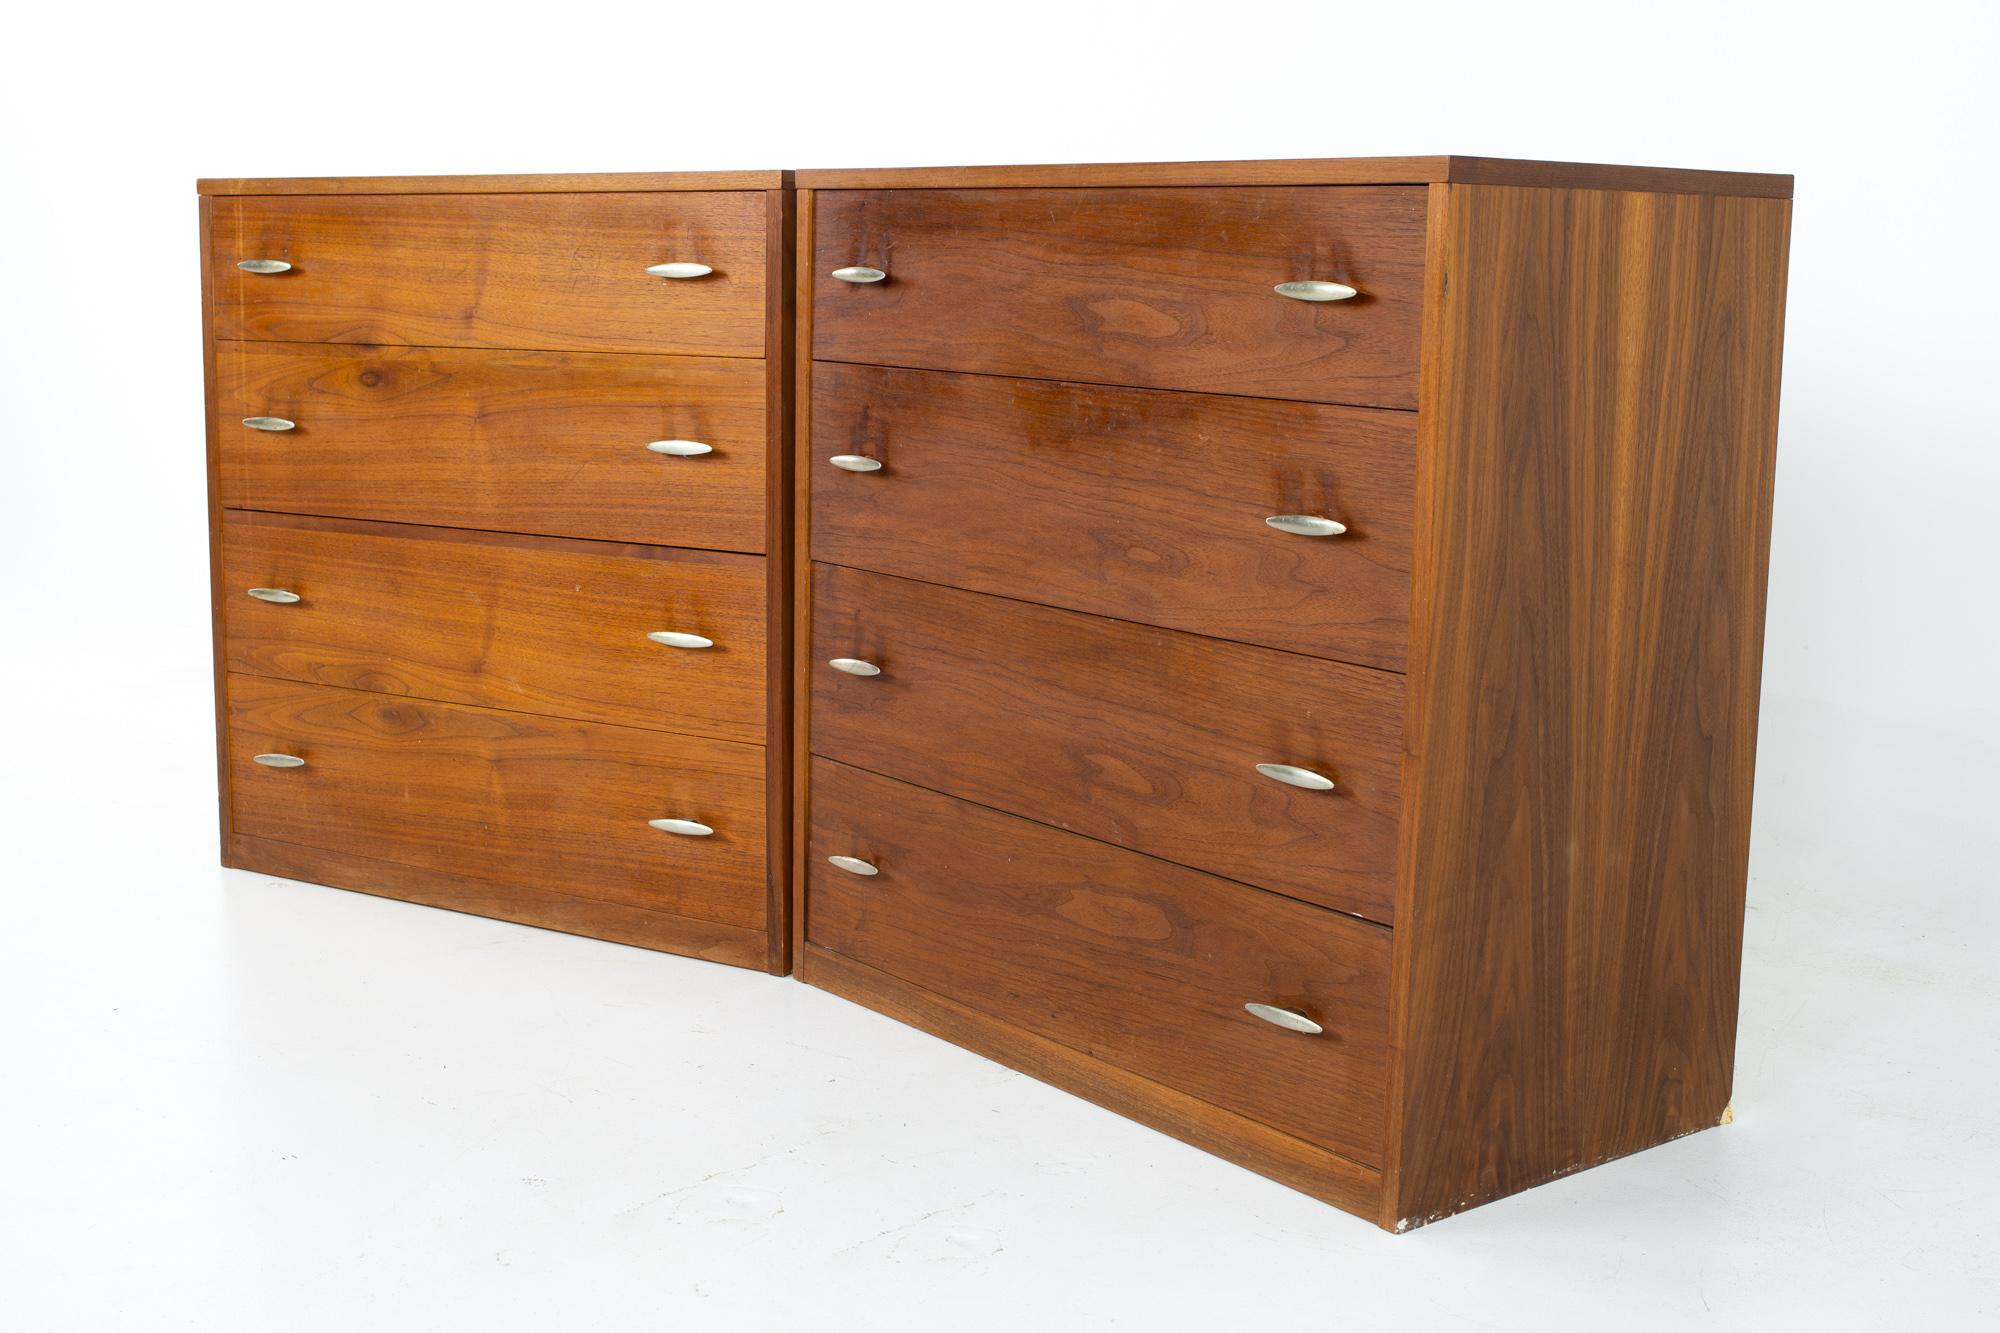 Crescent Furniture Company Mid Century Walnut and Stainless Dresser Chests - Matching Pair
Each dresser measures: 33.75 wide x 17.75 deep x 33.25 high

All pieces of furniture can be had in what we call restored vintage condition. That means the